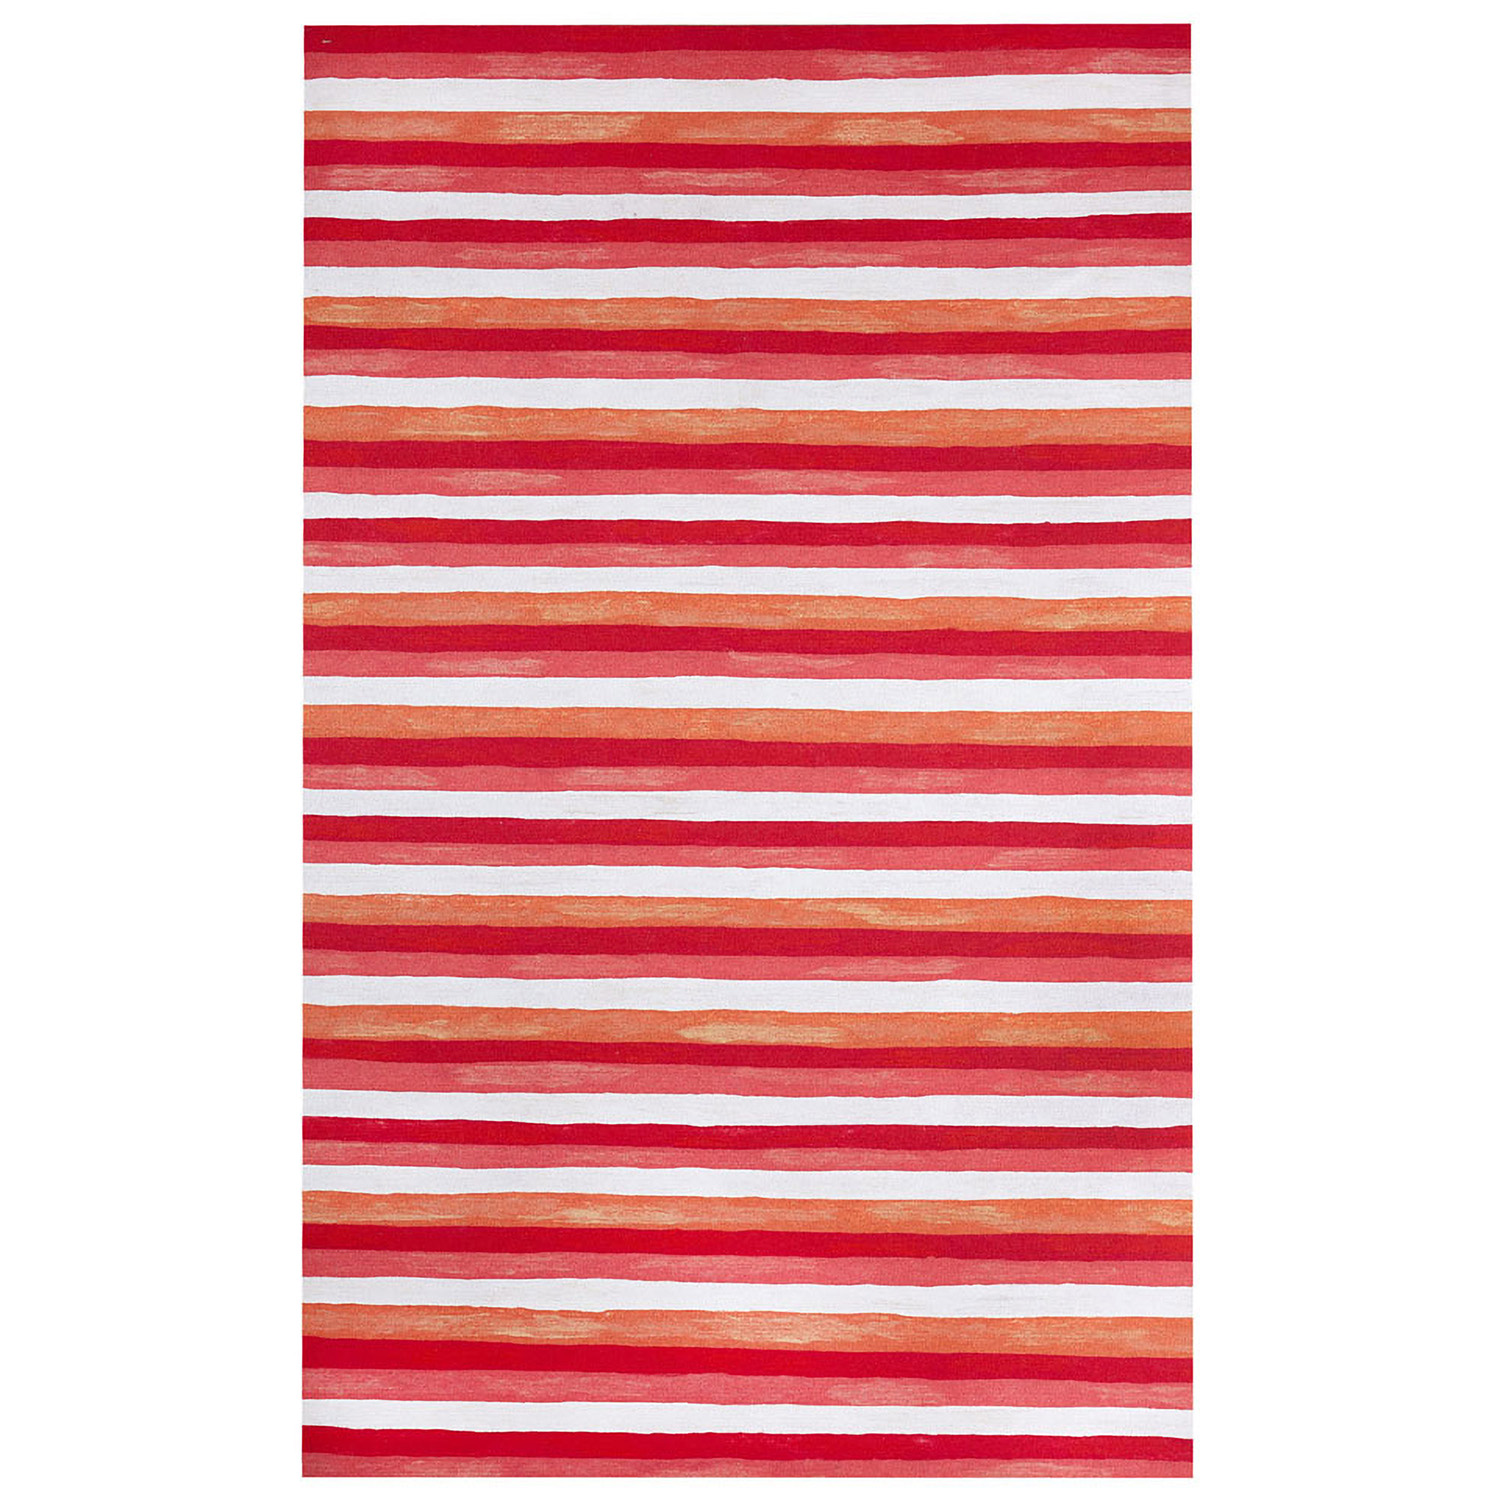 Liora Manne Visions II  Rug-Stripe, Painted Stripes Warm  Product Image